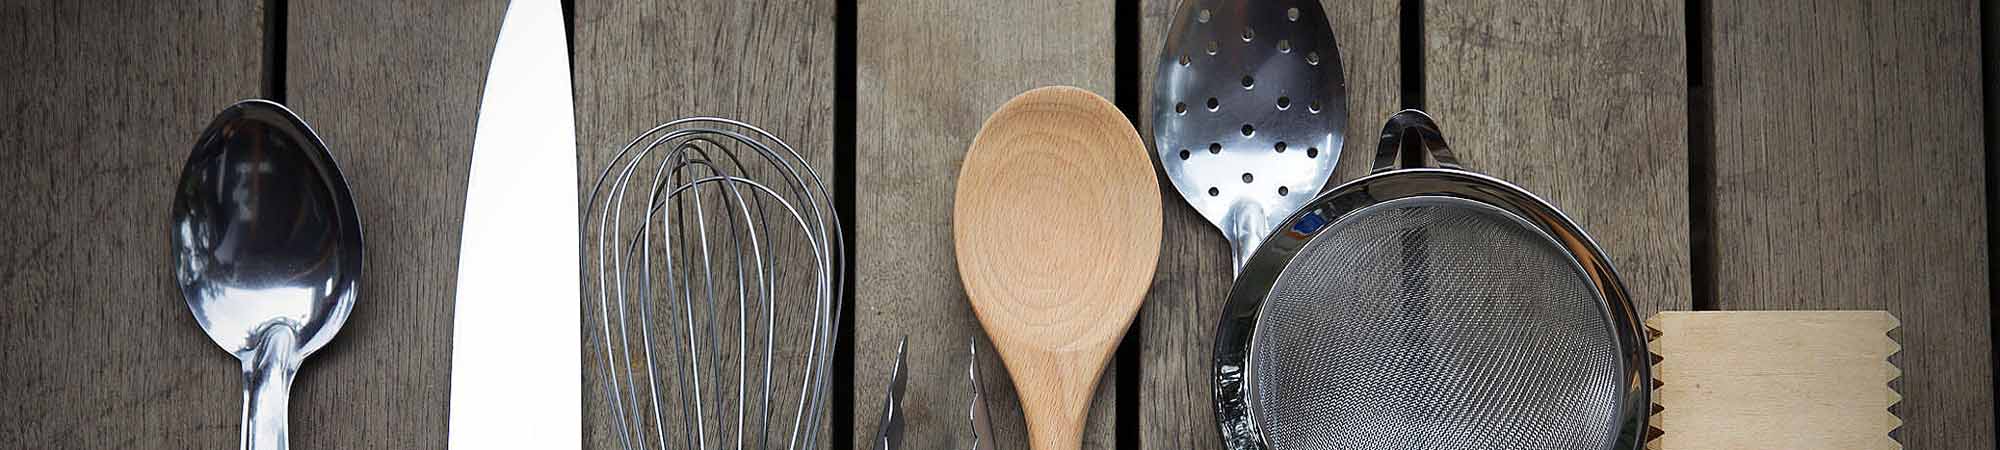 Several metal and wooden kitchen utensils which is the best material header image